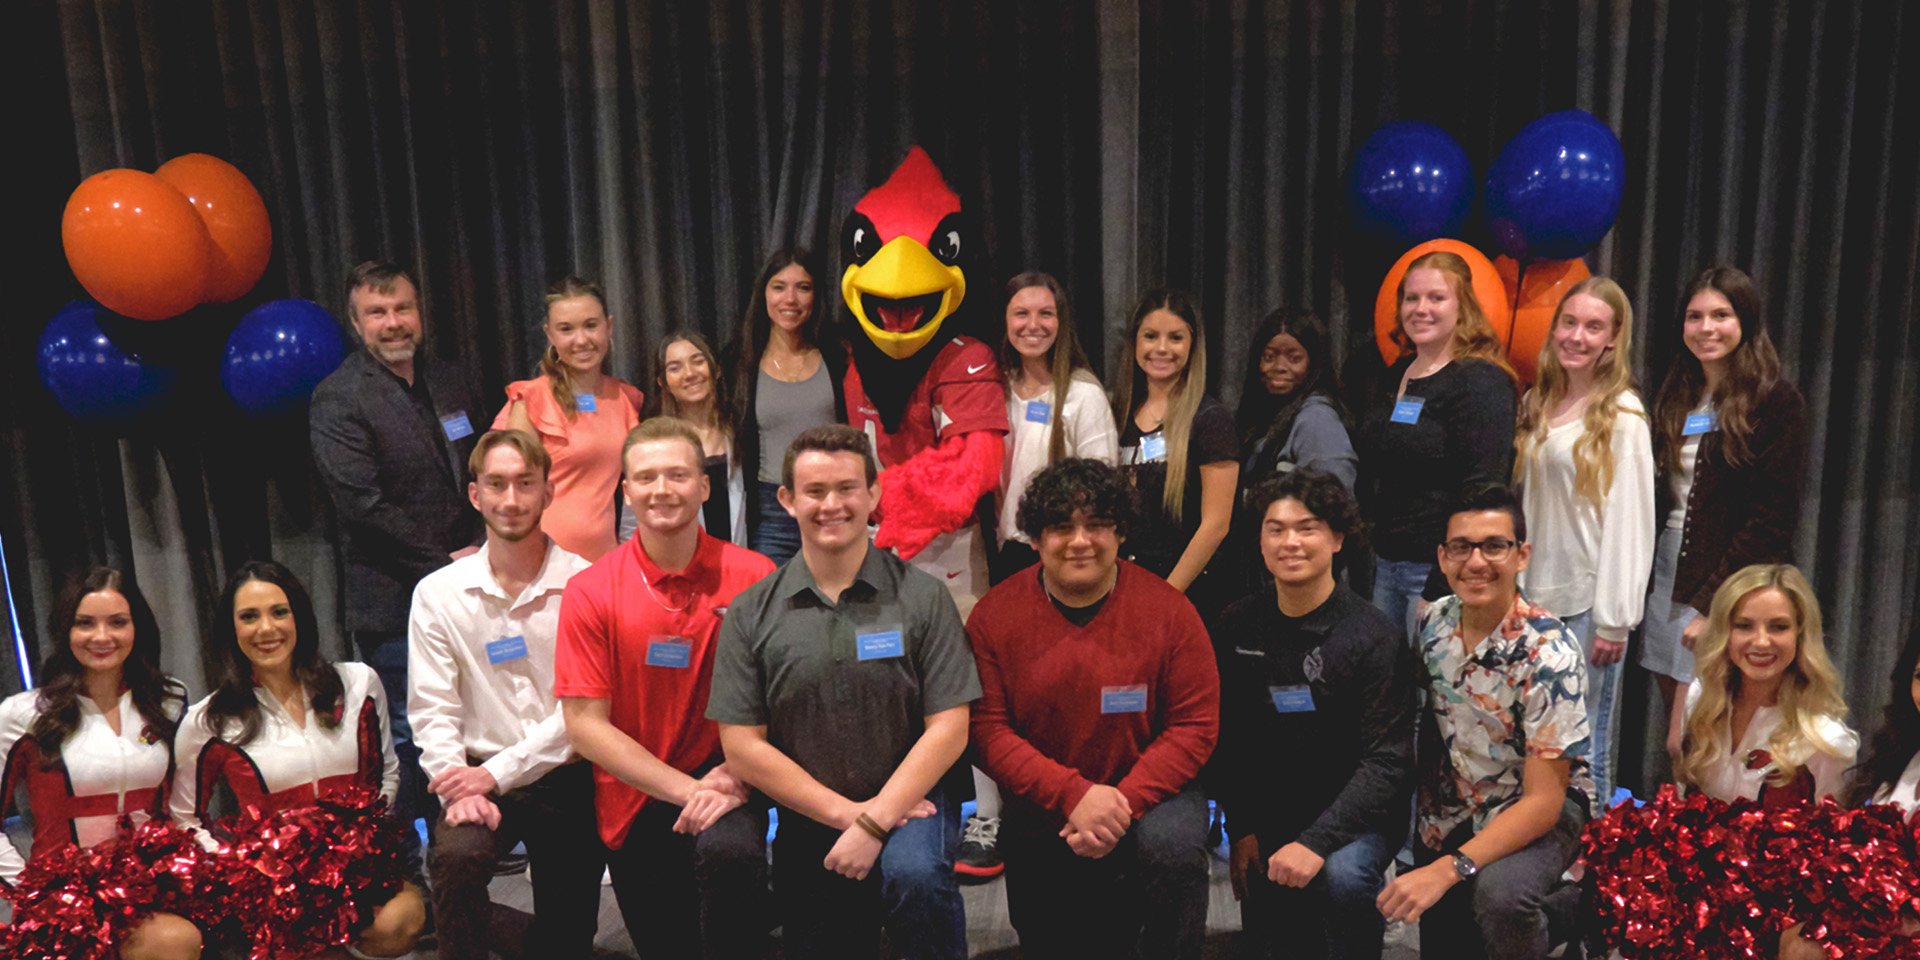 High school student-athletes awarded Desert Financial's scholarship stand with Arizona Cardinals cheerleaders and mascot, Big Red, celebrating their achievements.